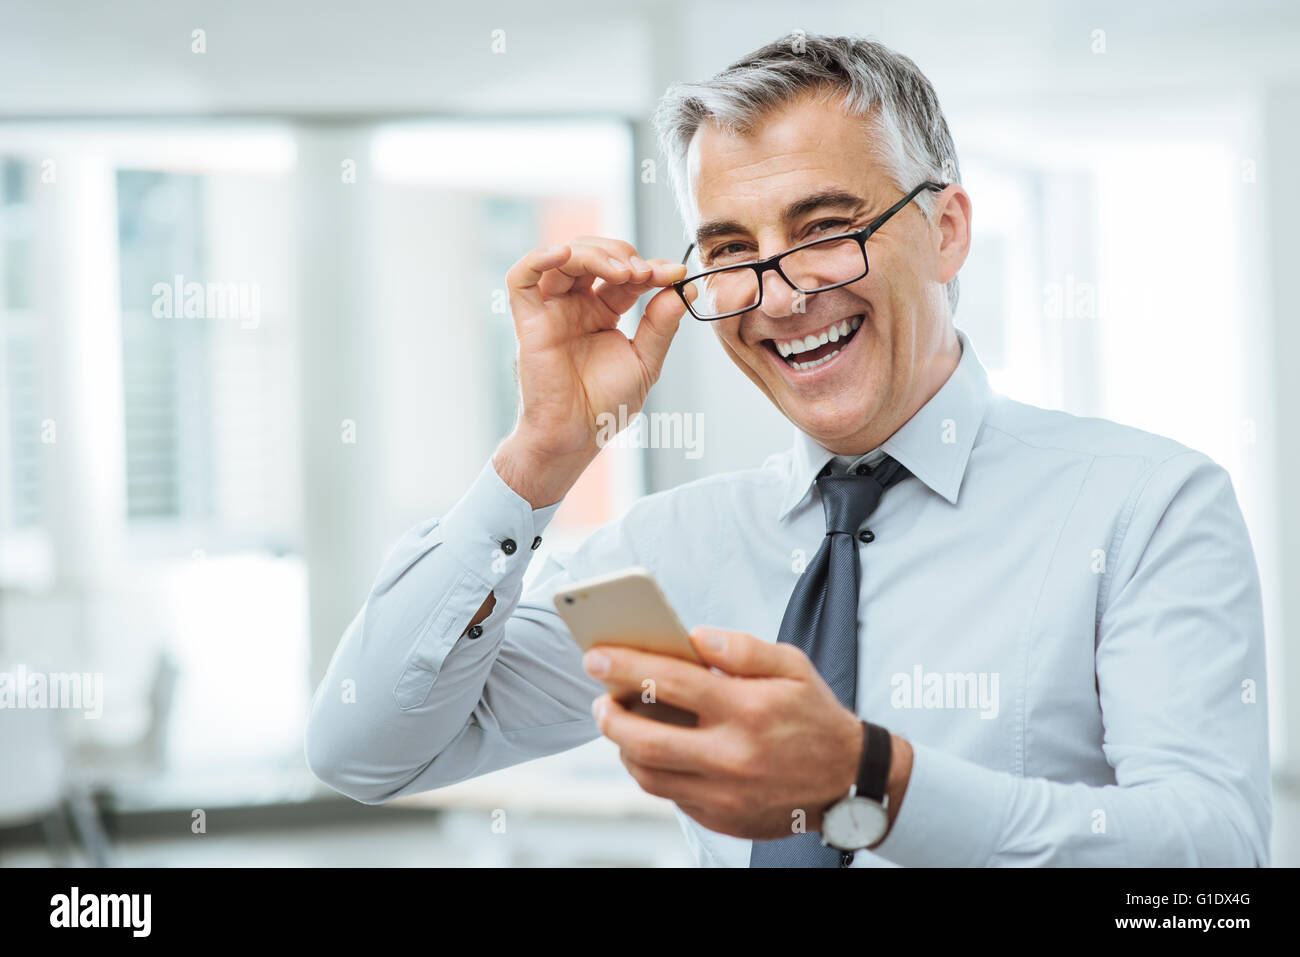 Smiling businessman with eyesight problems, he is adjusting his glasses and reading something on his mobile phone Stock Photo